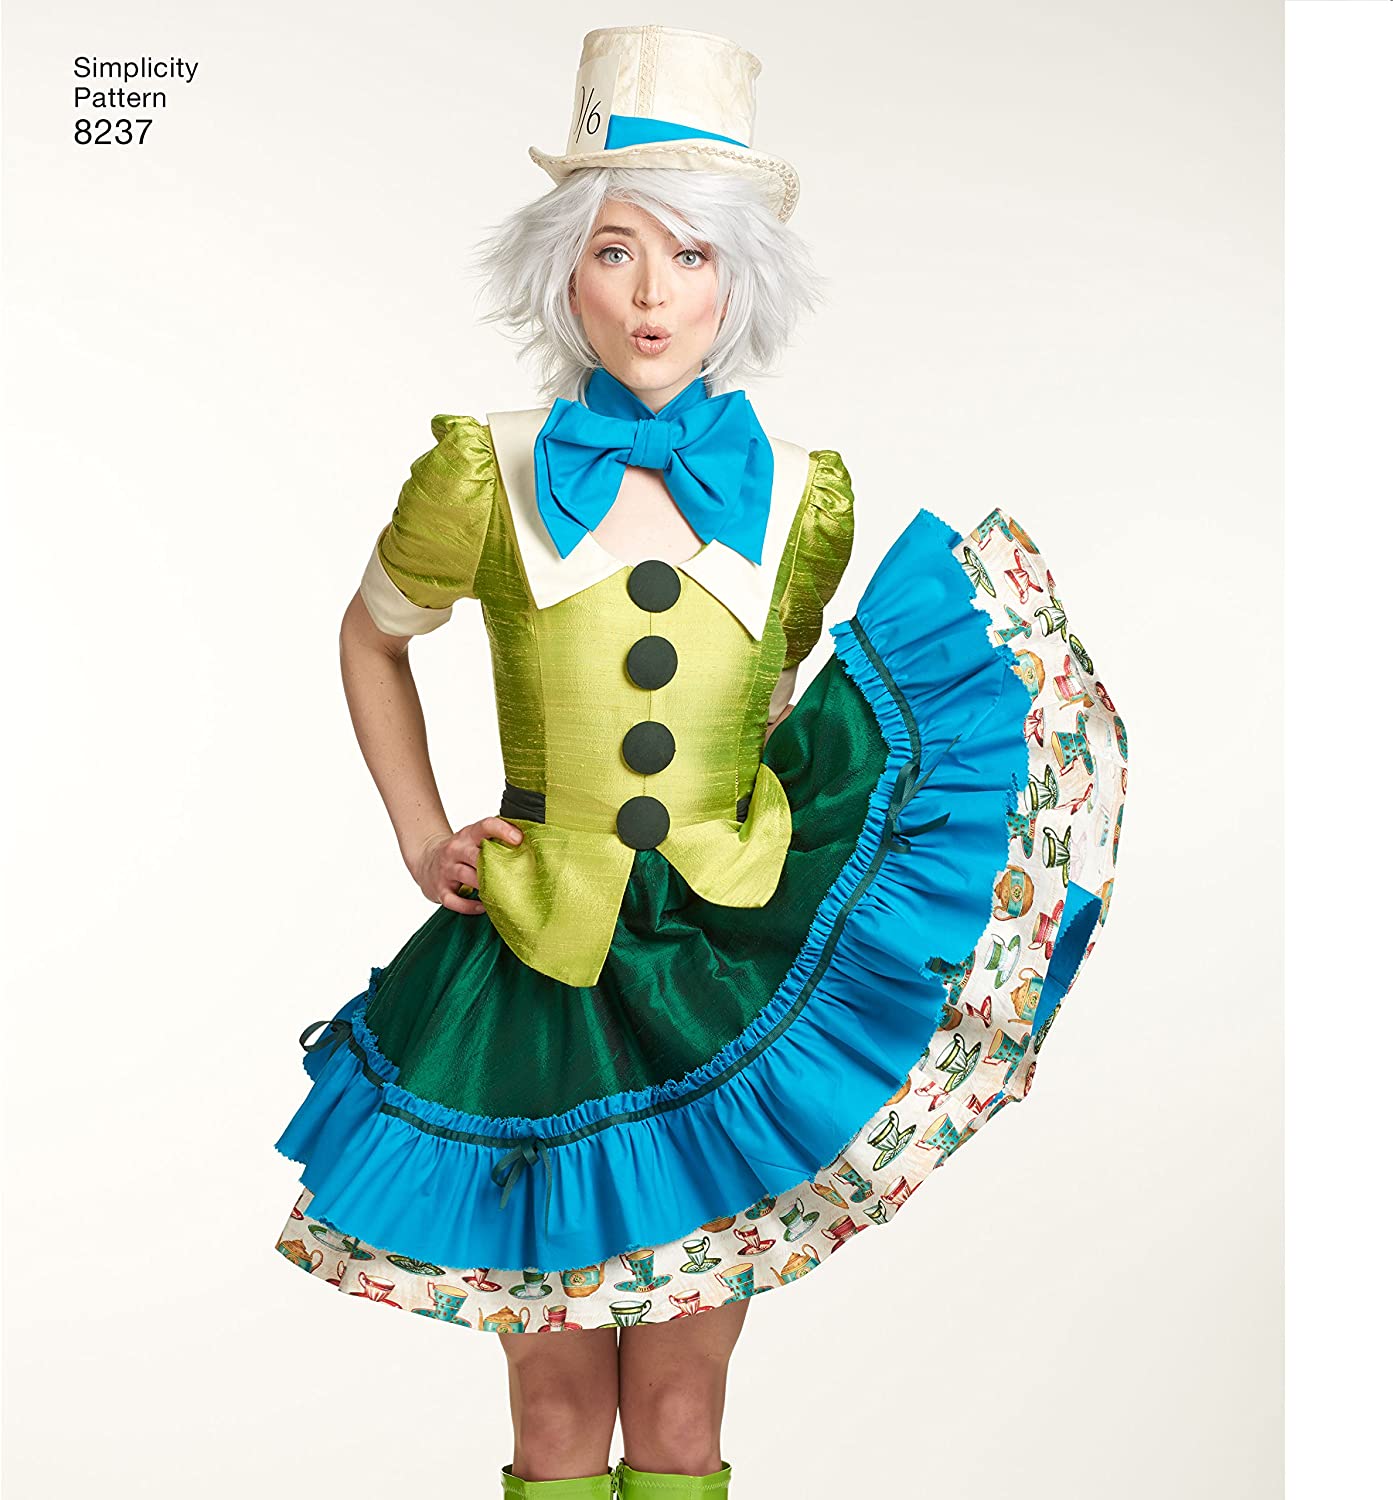 Alice in Wonderland - White Rabbit and Mad Hatter - Simplicity 8237 Costume Sewing Pattern